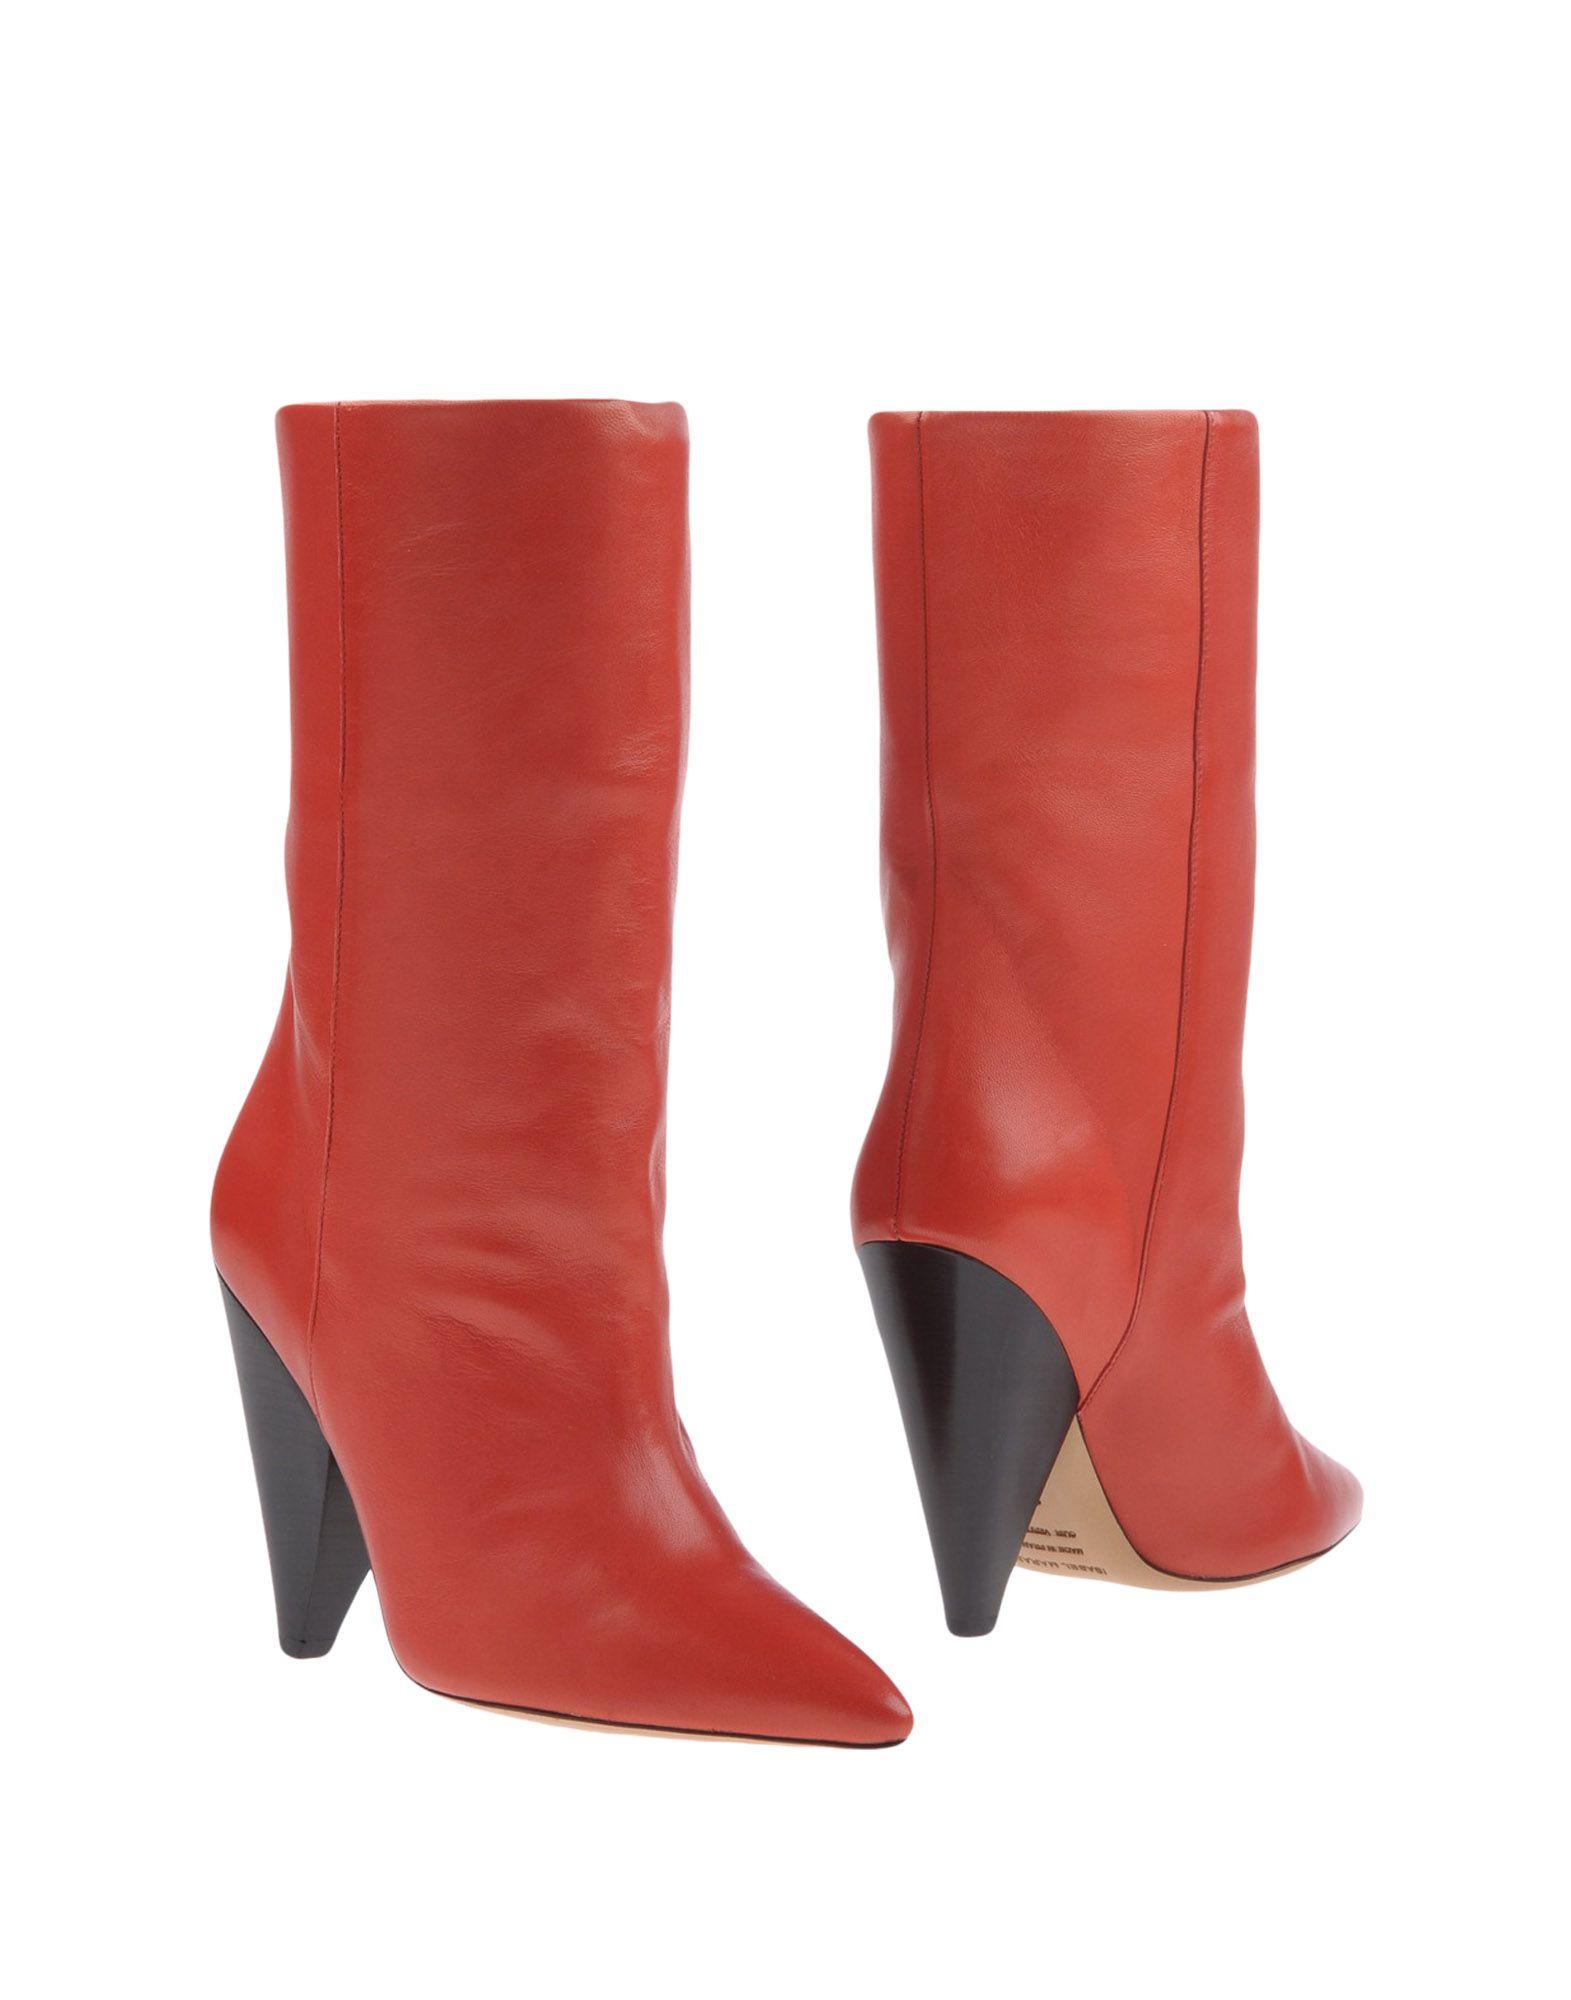 isabel marant red boots